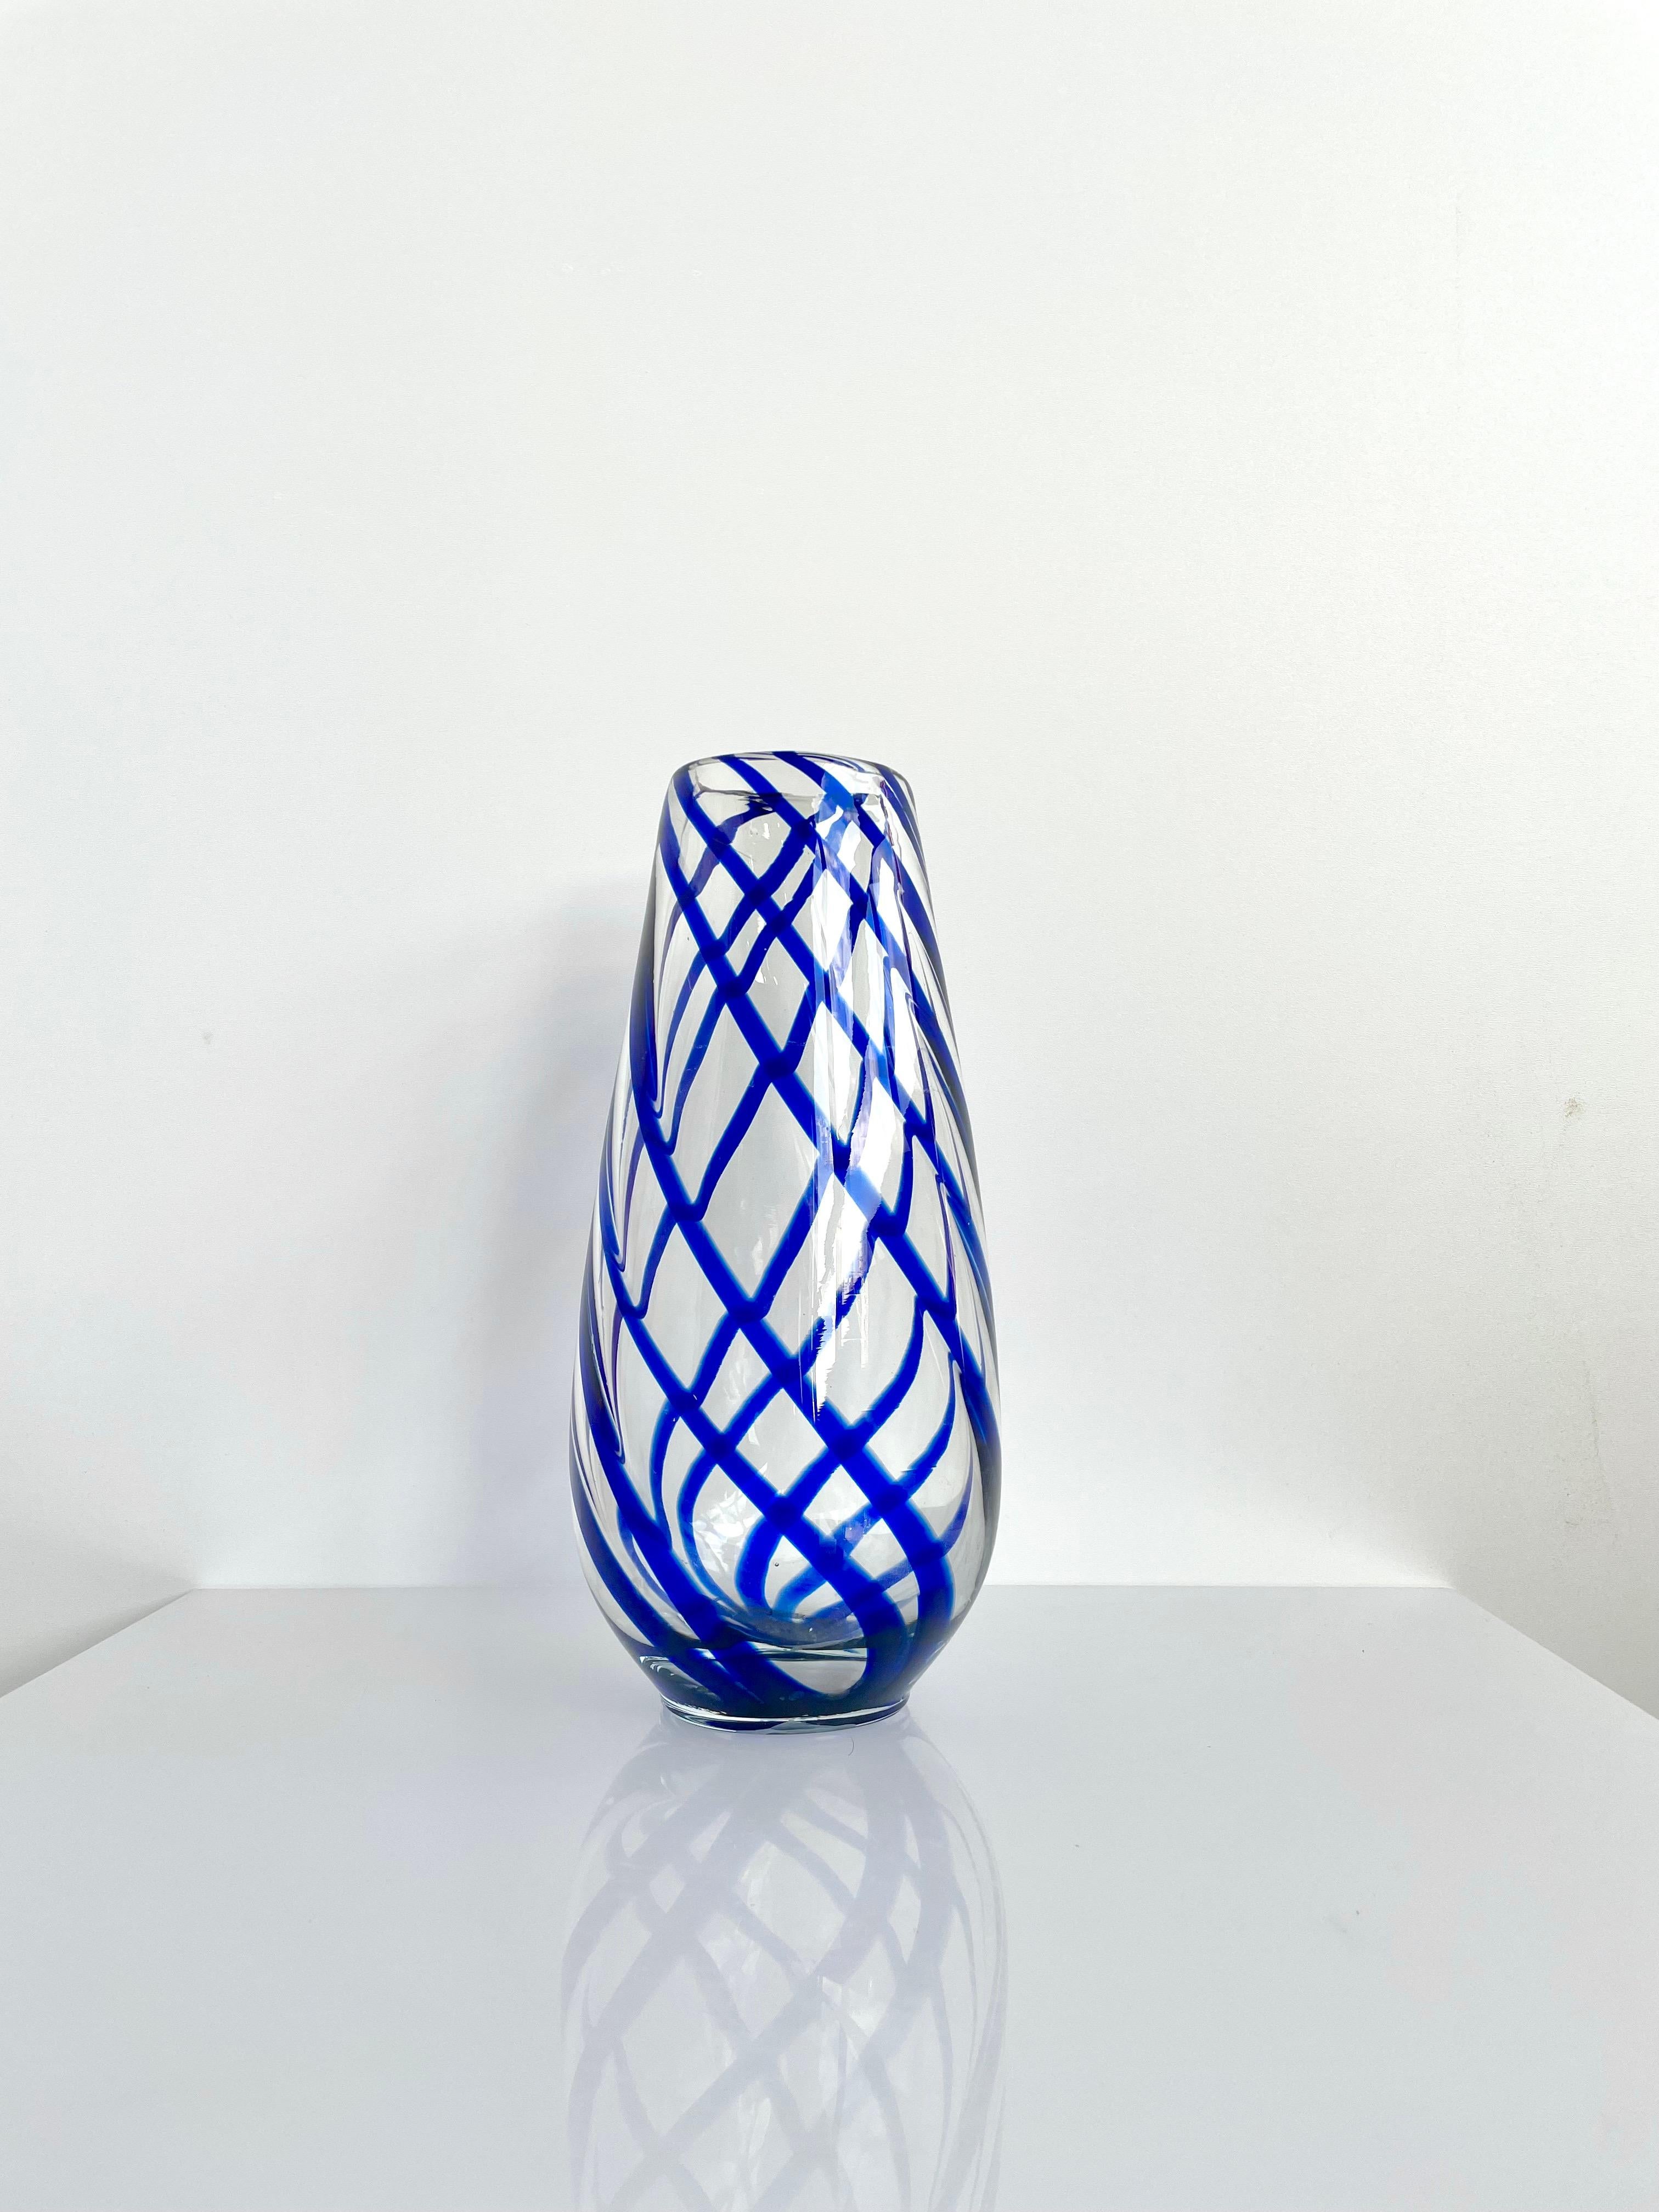 1960's Murano glass vase. Striking blue coloured swirls in clear glass (handmade). For use as a decorative item or as a functional vessel for holding flowers or other decorative elements. 